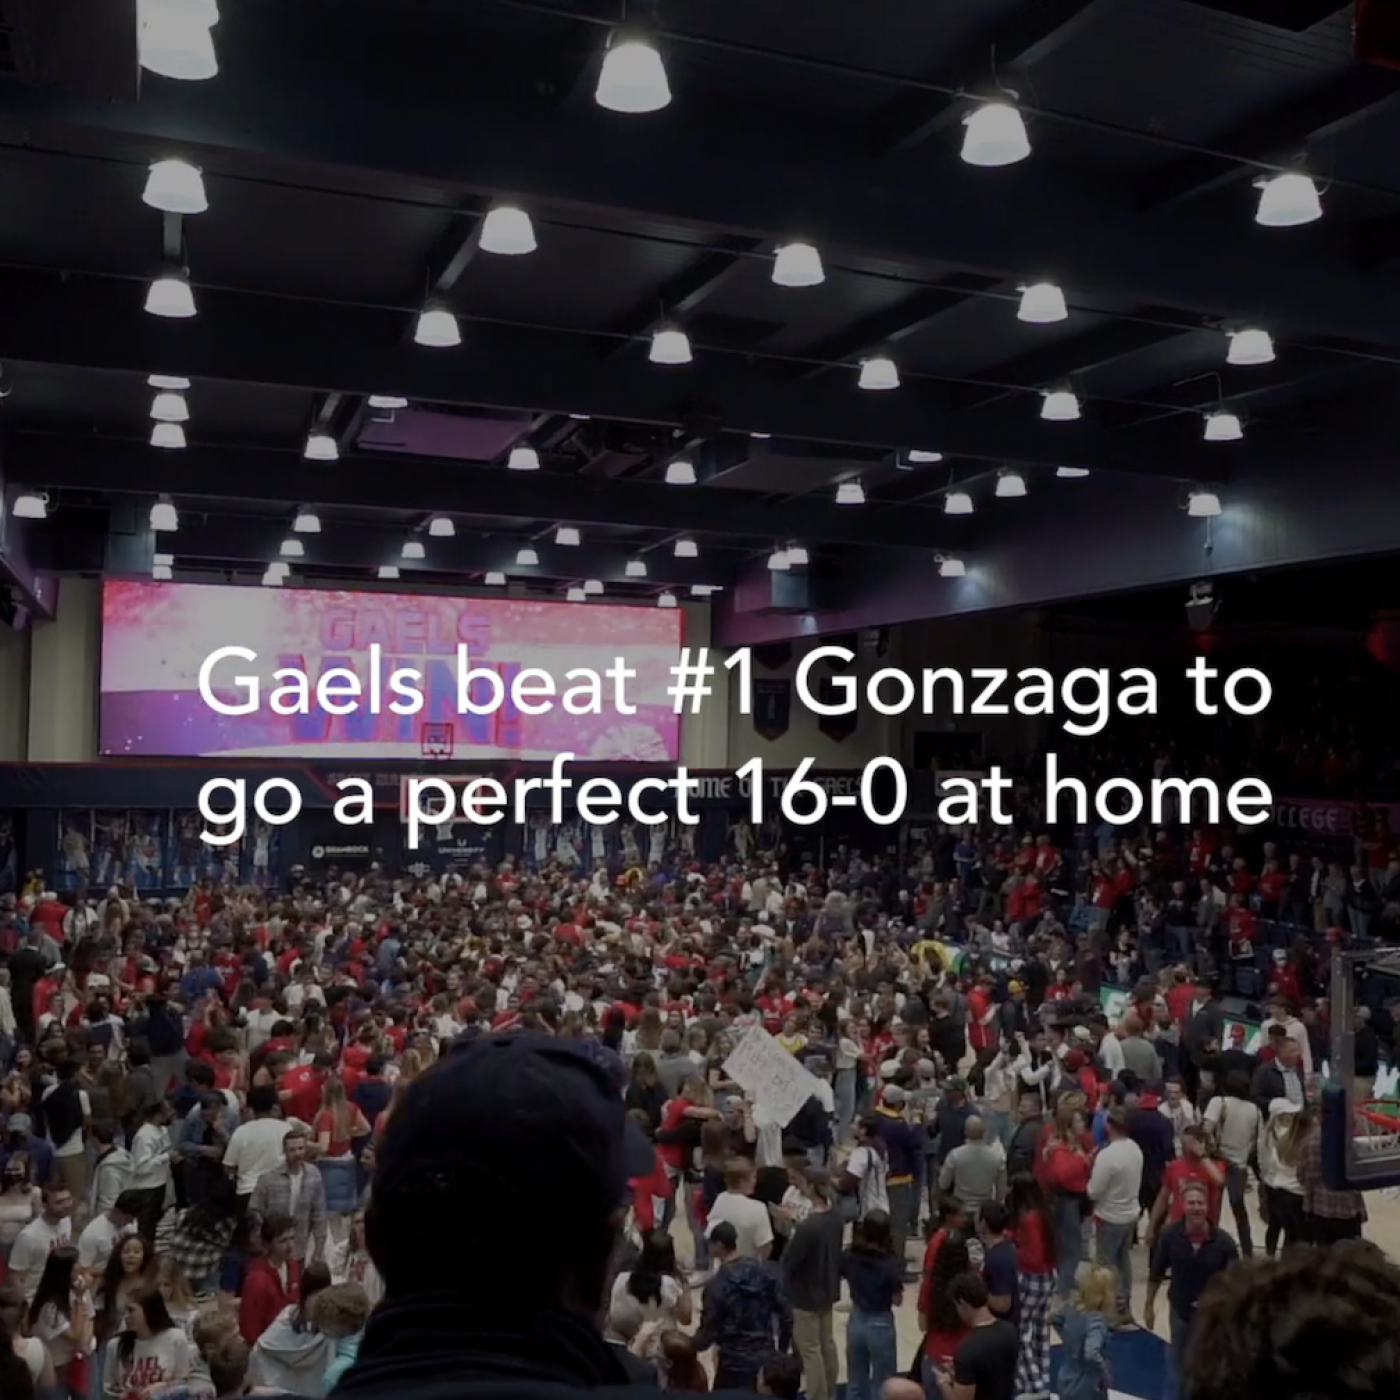 The text Gaels Beat #1 Gonzaga to go a perfect 16-0 at home over a crowd cheering